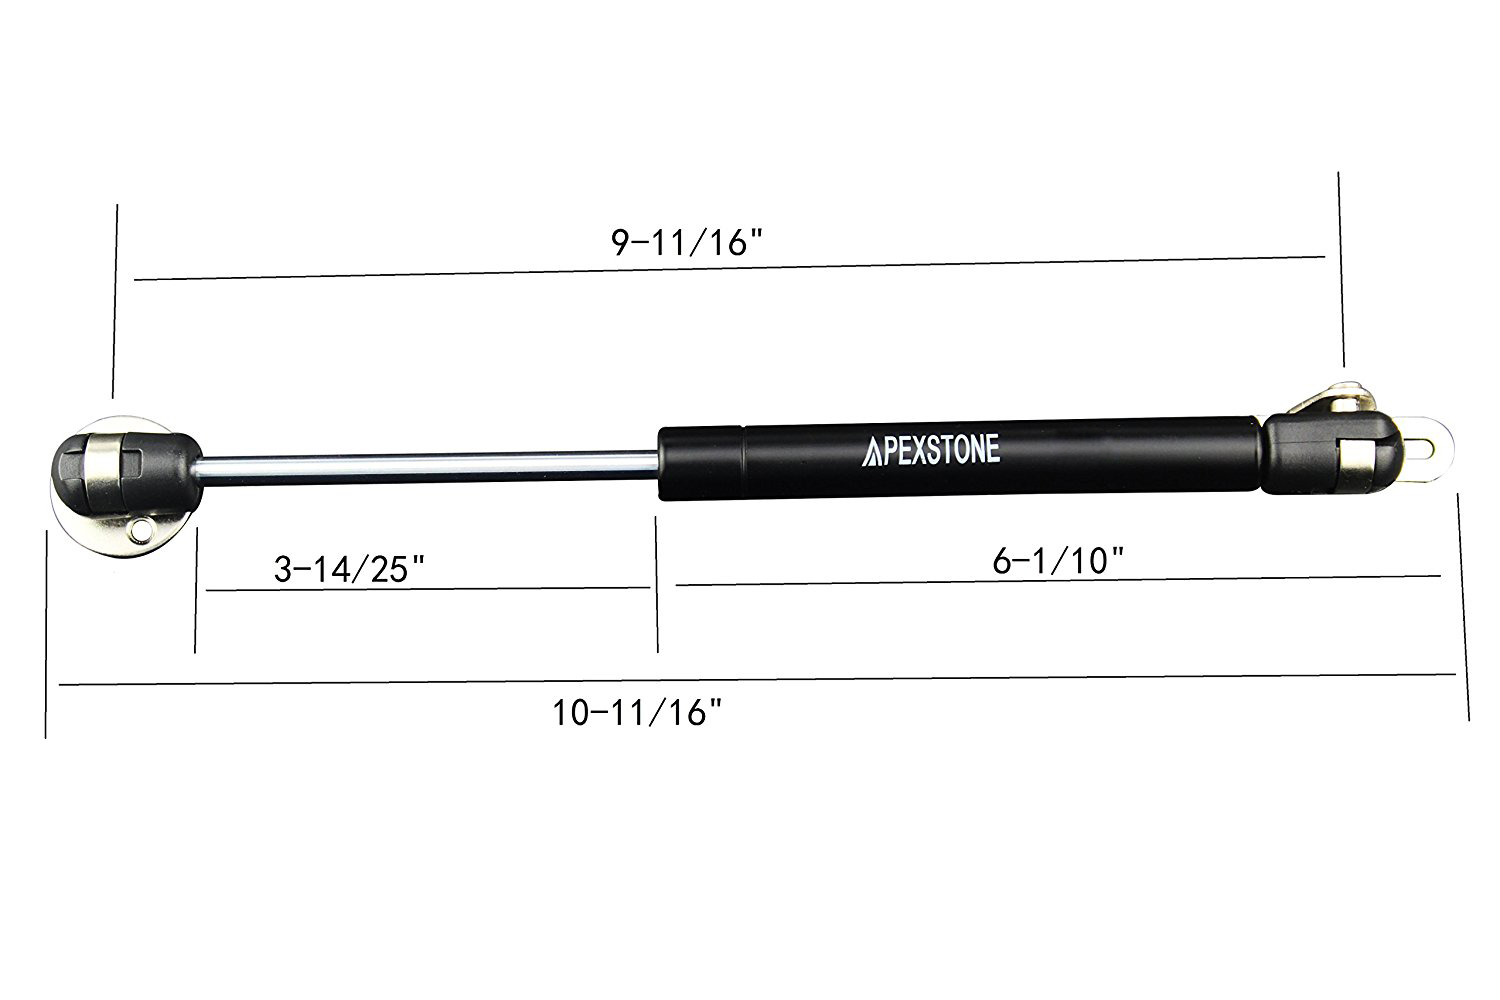 https://apexstone.co/wp-content/uploads/2022/06/Apexstone-10lb-10-inch-Gas-Struts-Gas-Springs-Gas-Strut-Lift-Support-Gas-Shocks-Lid-Stay-Lid-Support.jpg